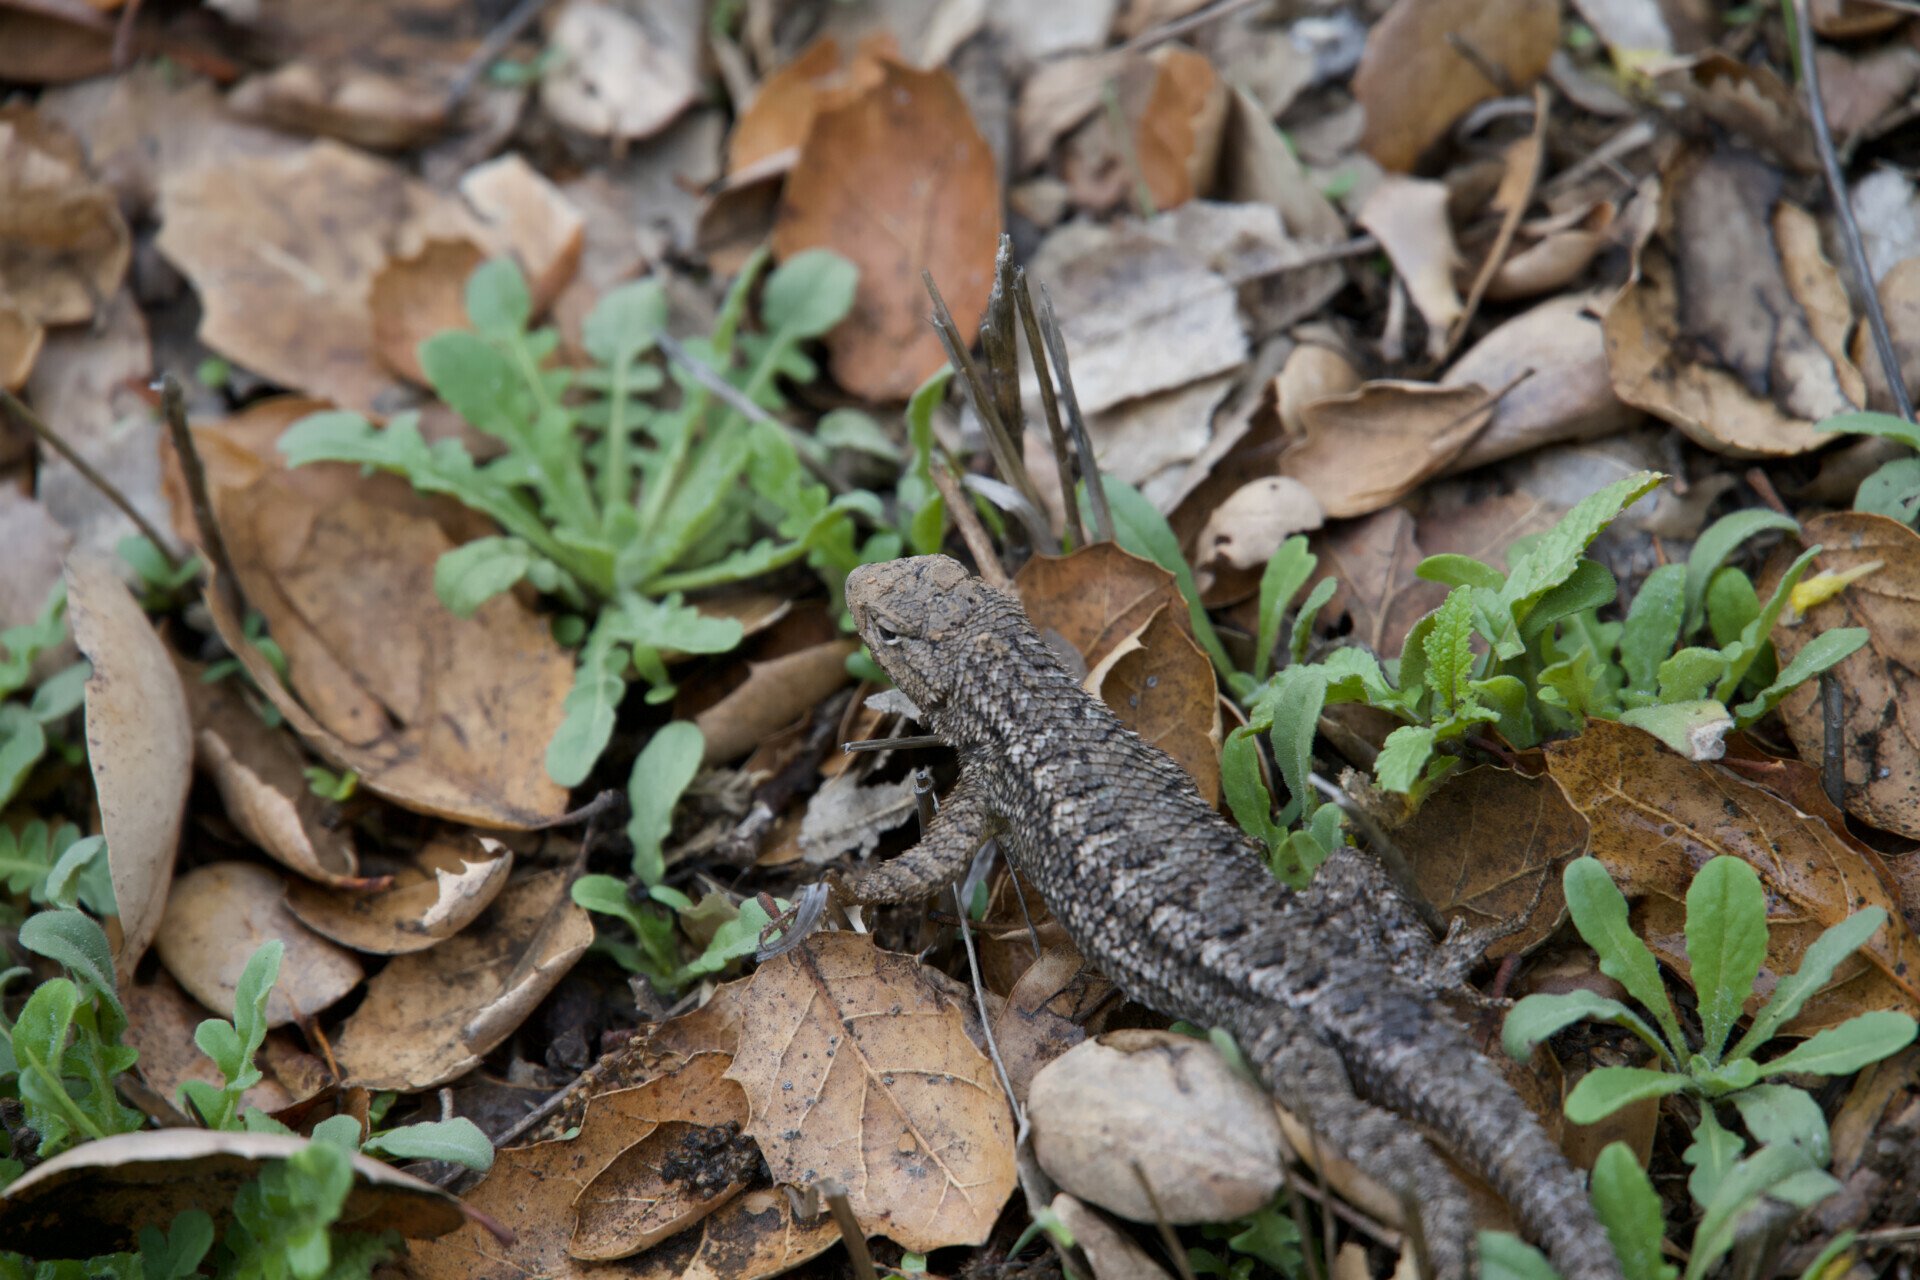 Western Fence Lizard camouflaged among fallen leaves at Malibu Creek State Park